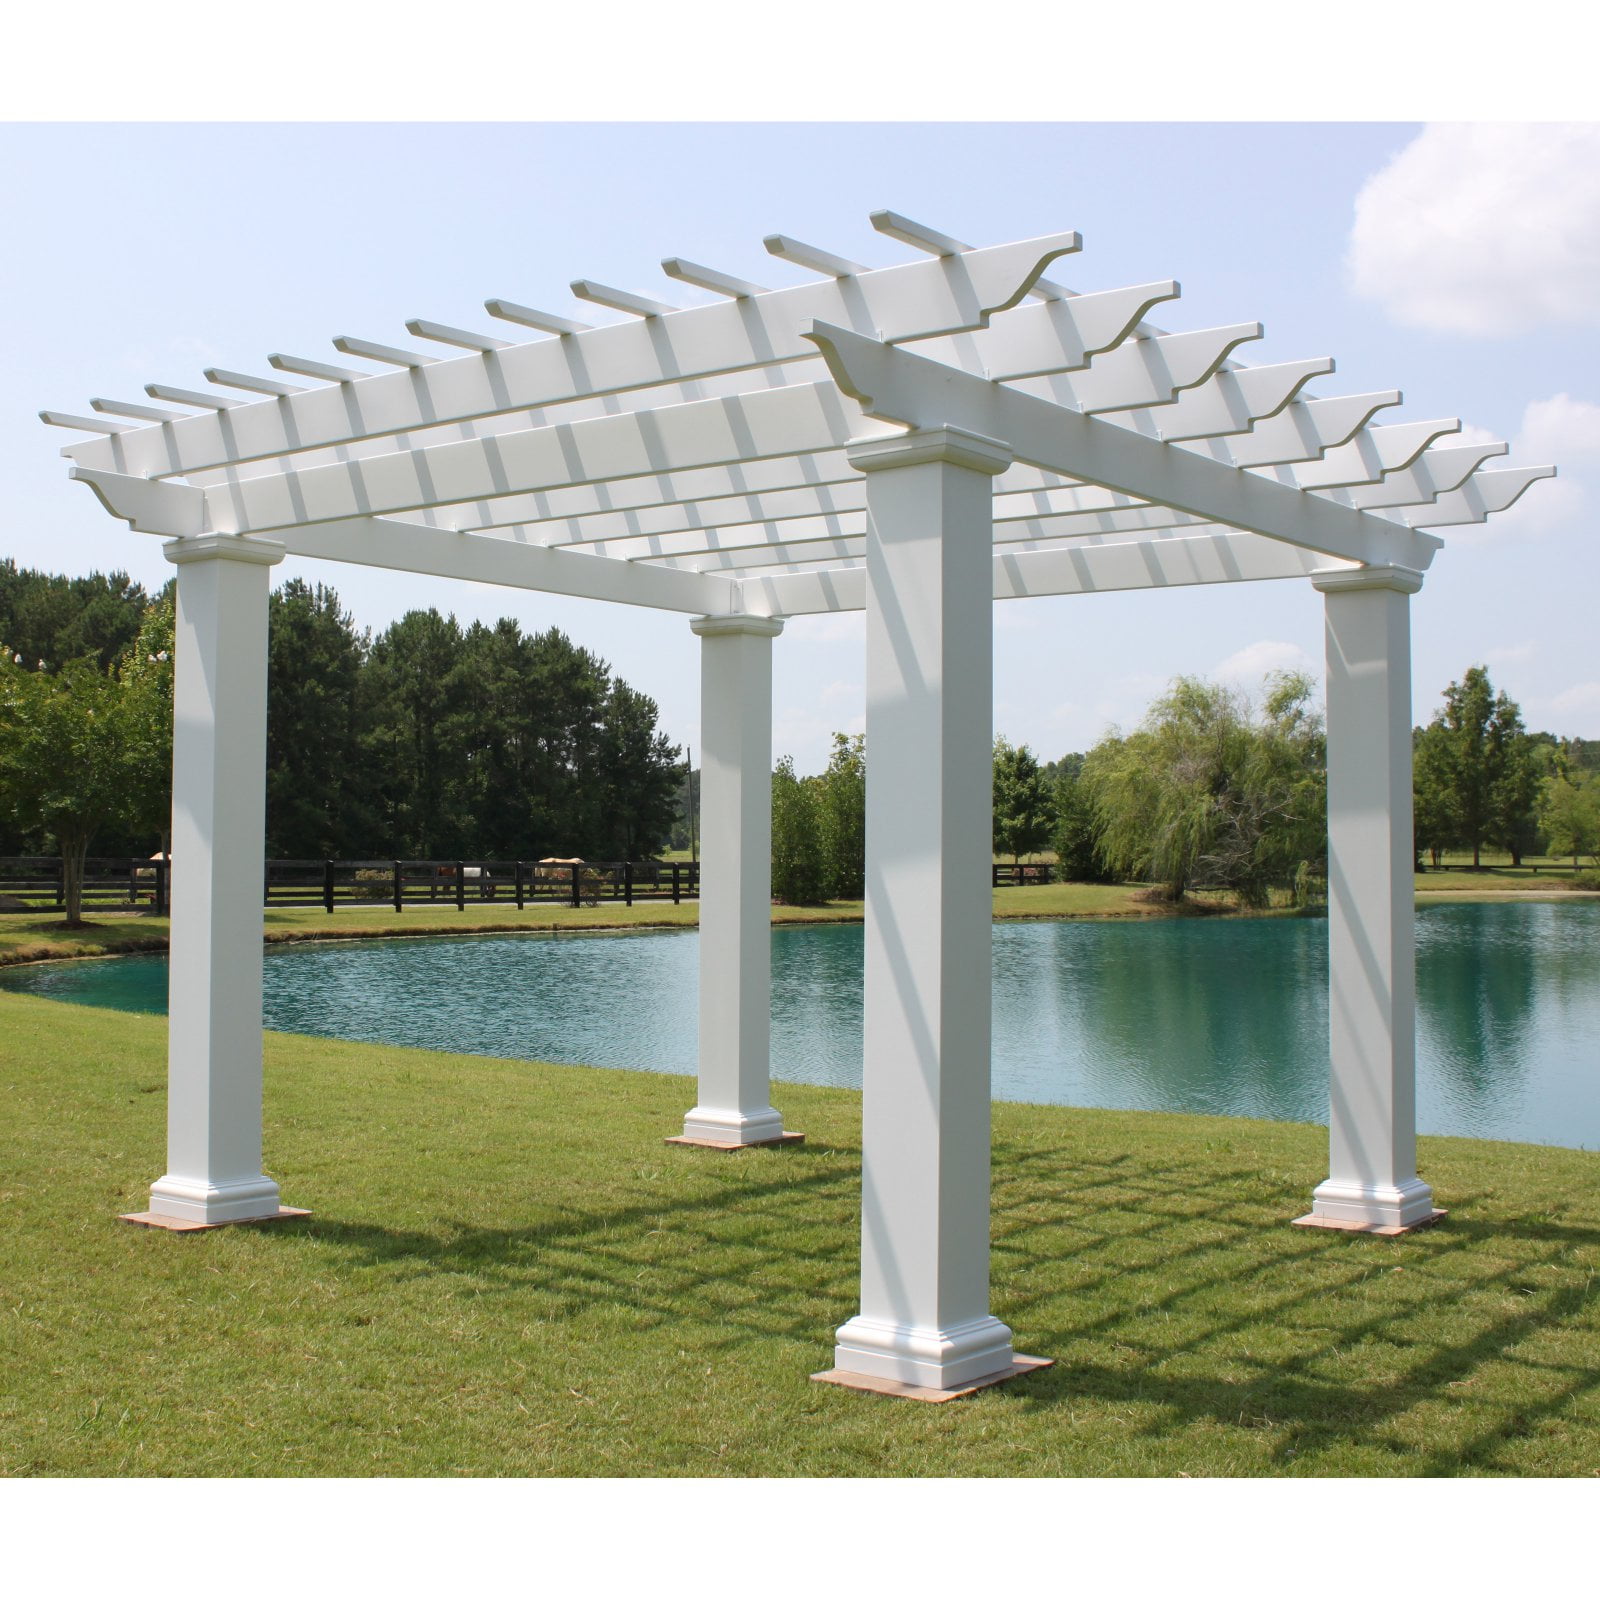 Add shade and an elegant dining area to your backyard with the Key West Fib...